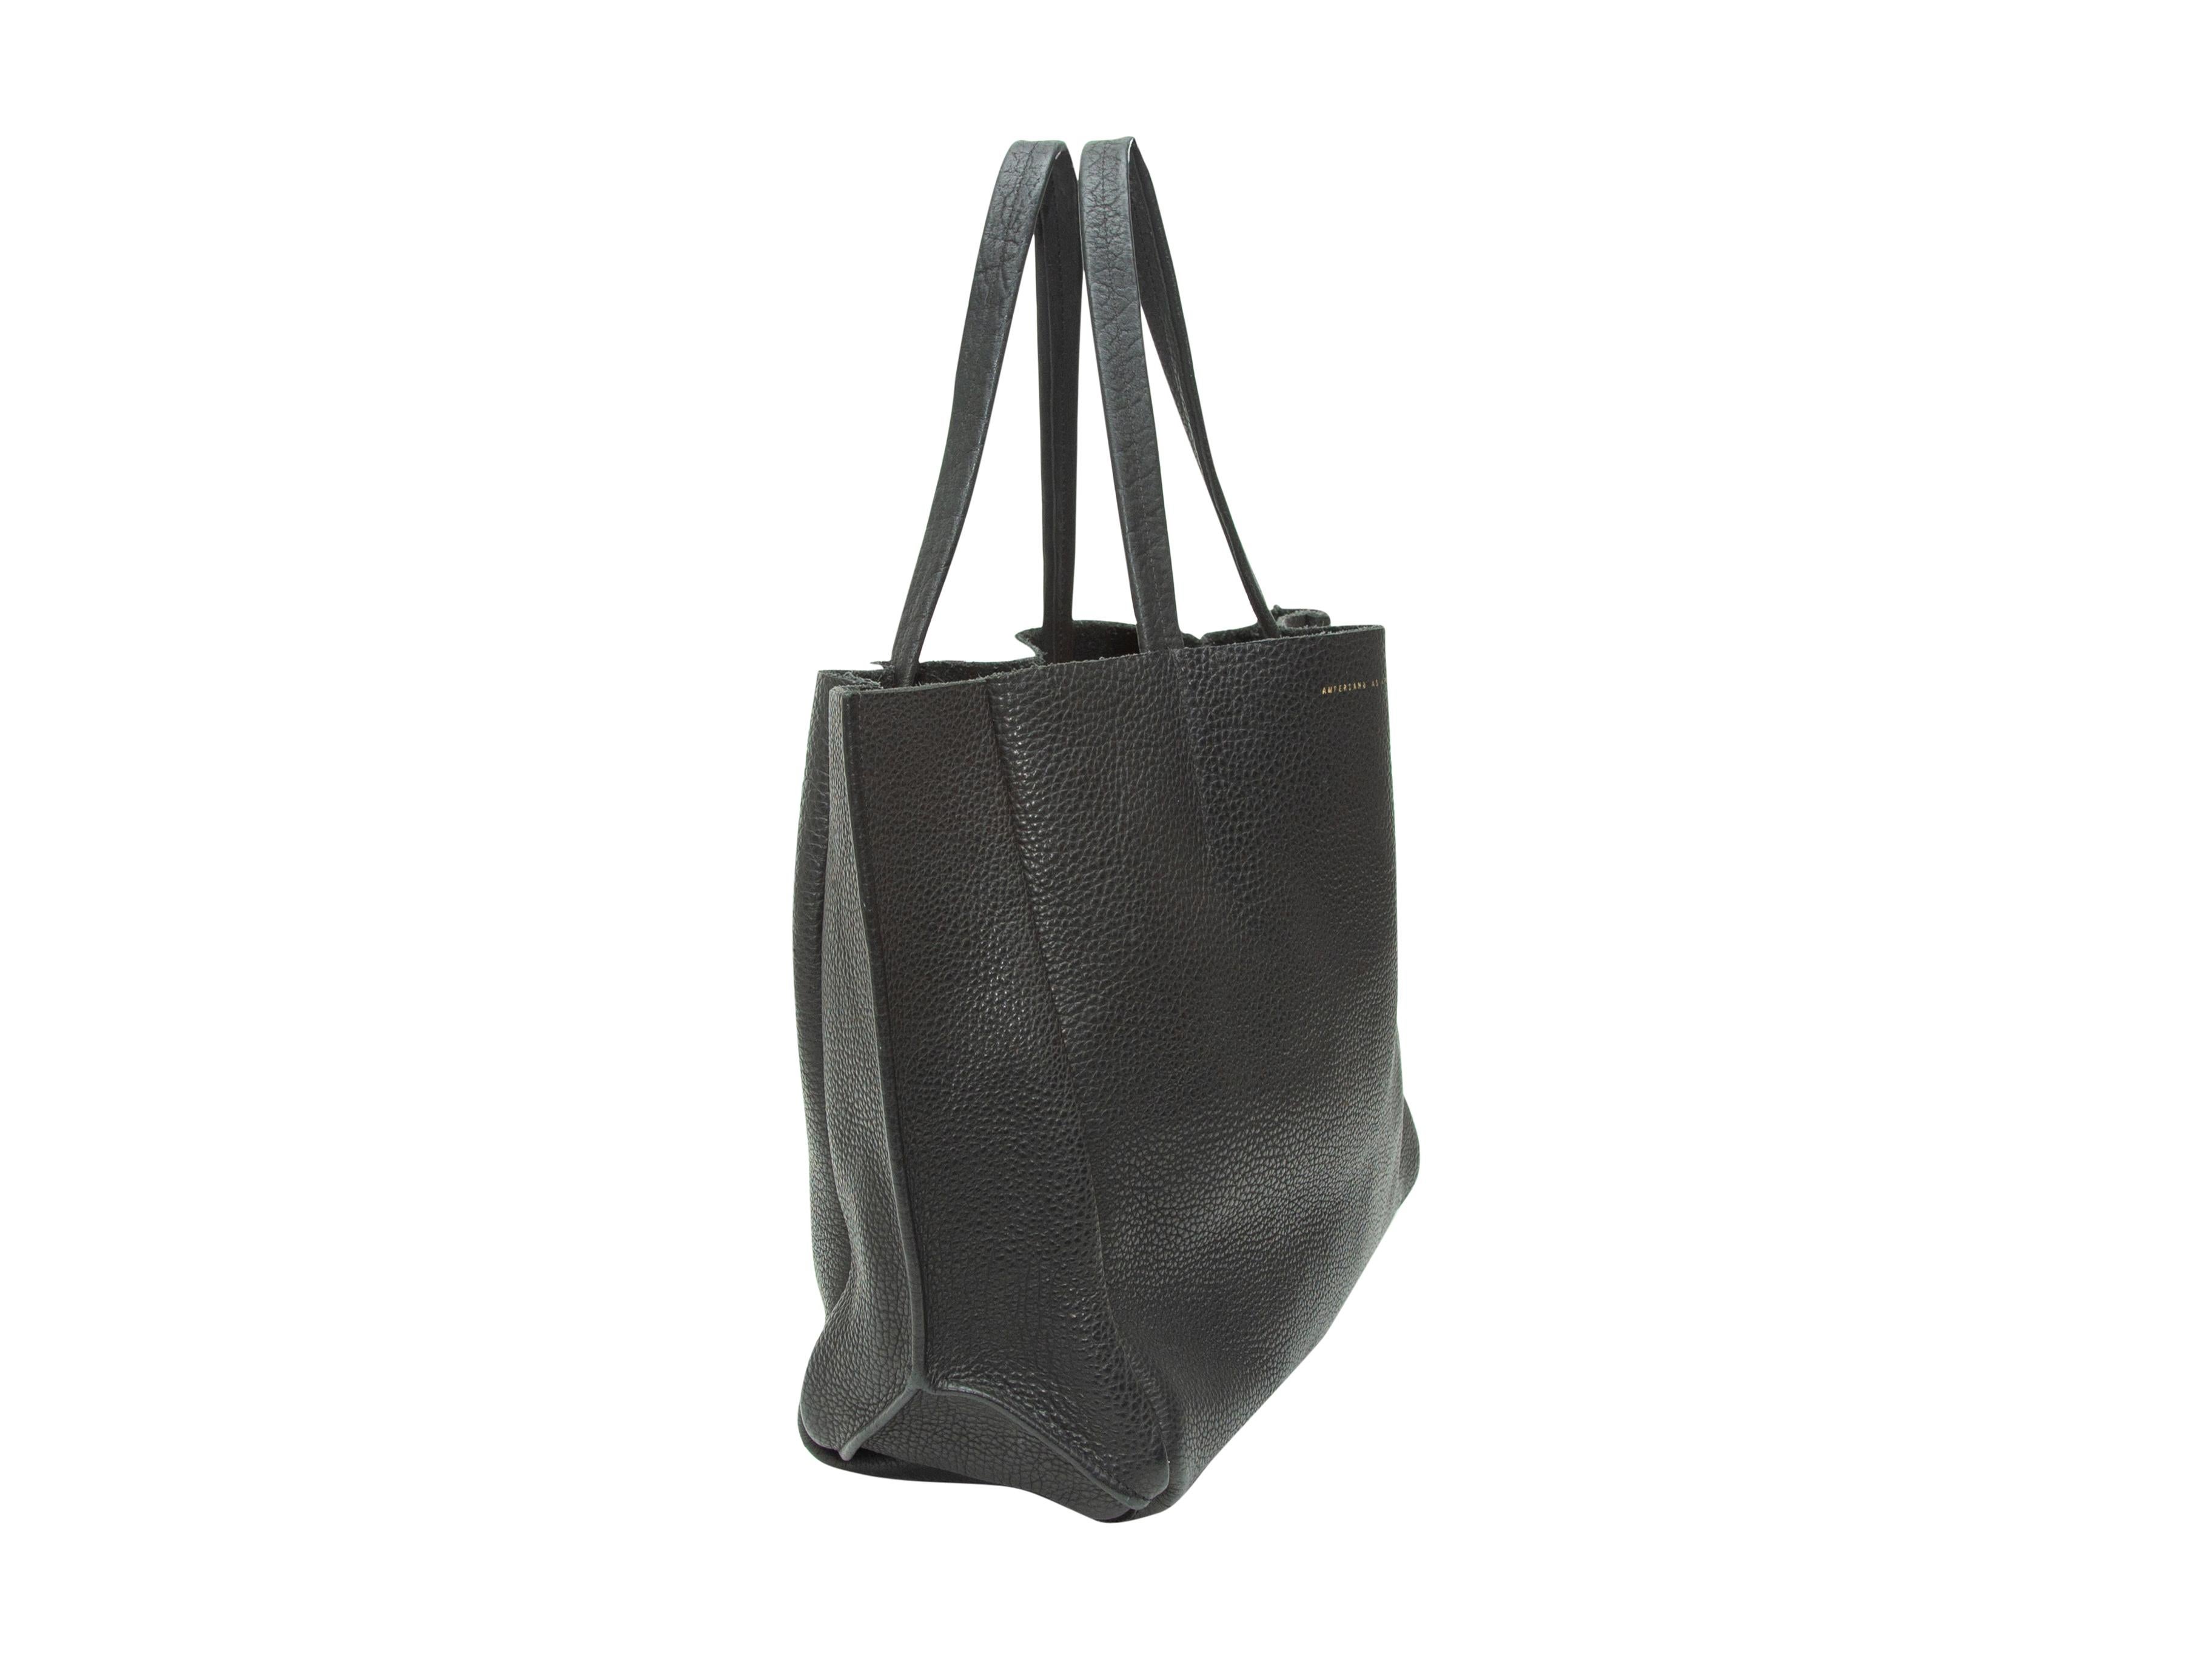 Product details: Black leather tote bag by Ampersand As Apostrophe. Tonal stitching throughout. Dual handles. 14